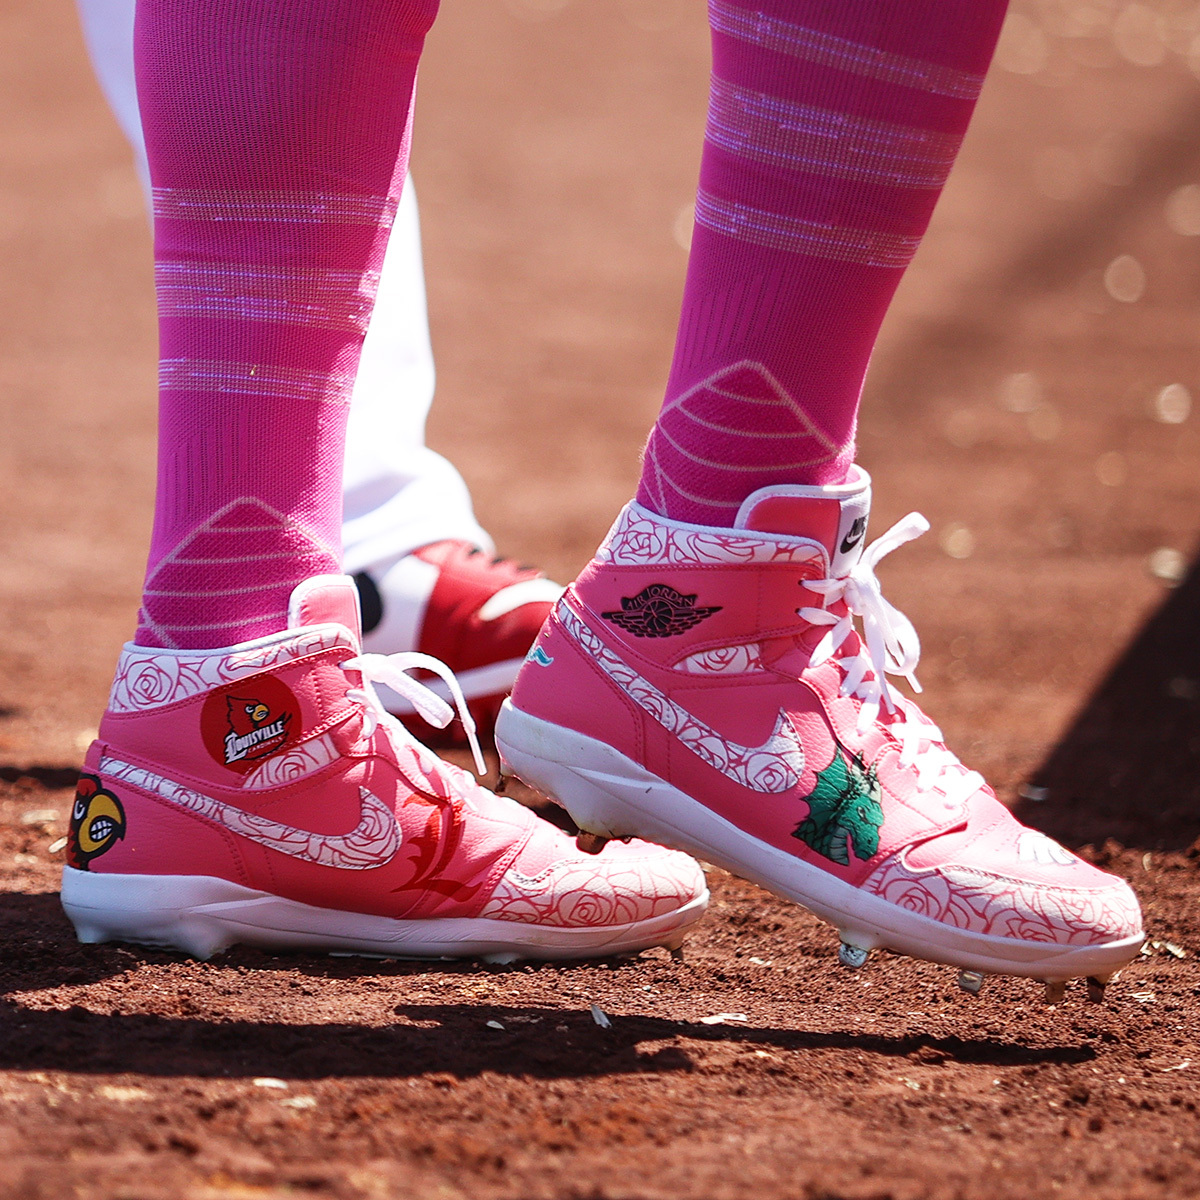 Angels outfielder Jo Adell is wearing custom Jordan cleats that feature logos of the schools where his mom, Dr. Nicole Adell, has taught at, as well as the University of Louisville where she earned her doctorates degree